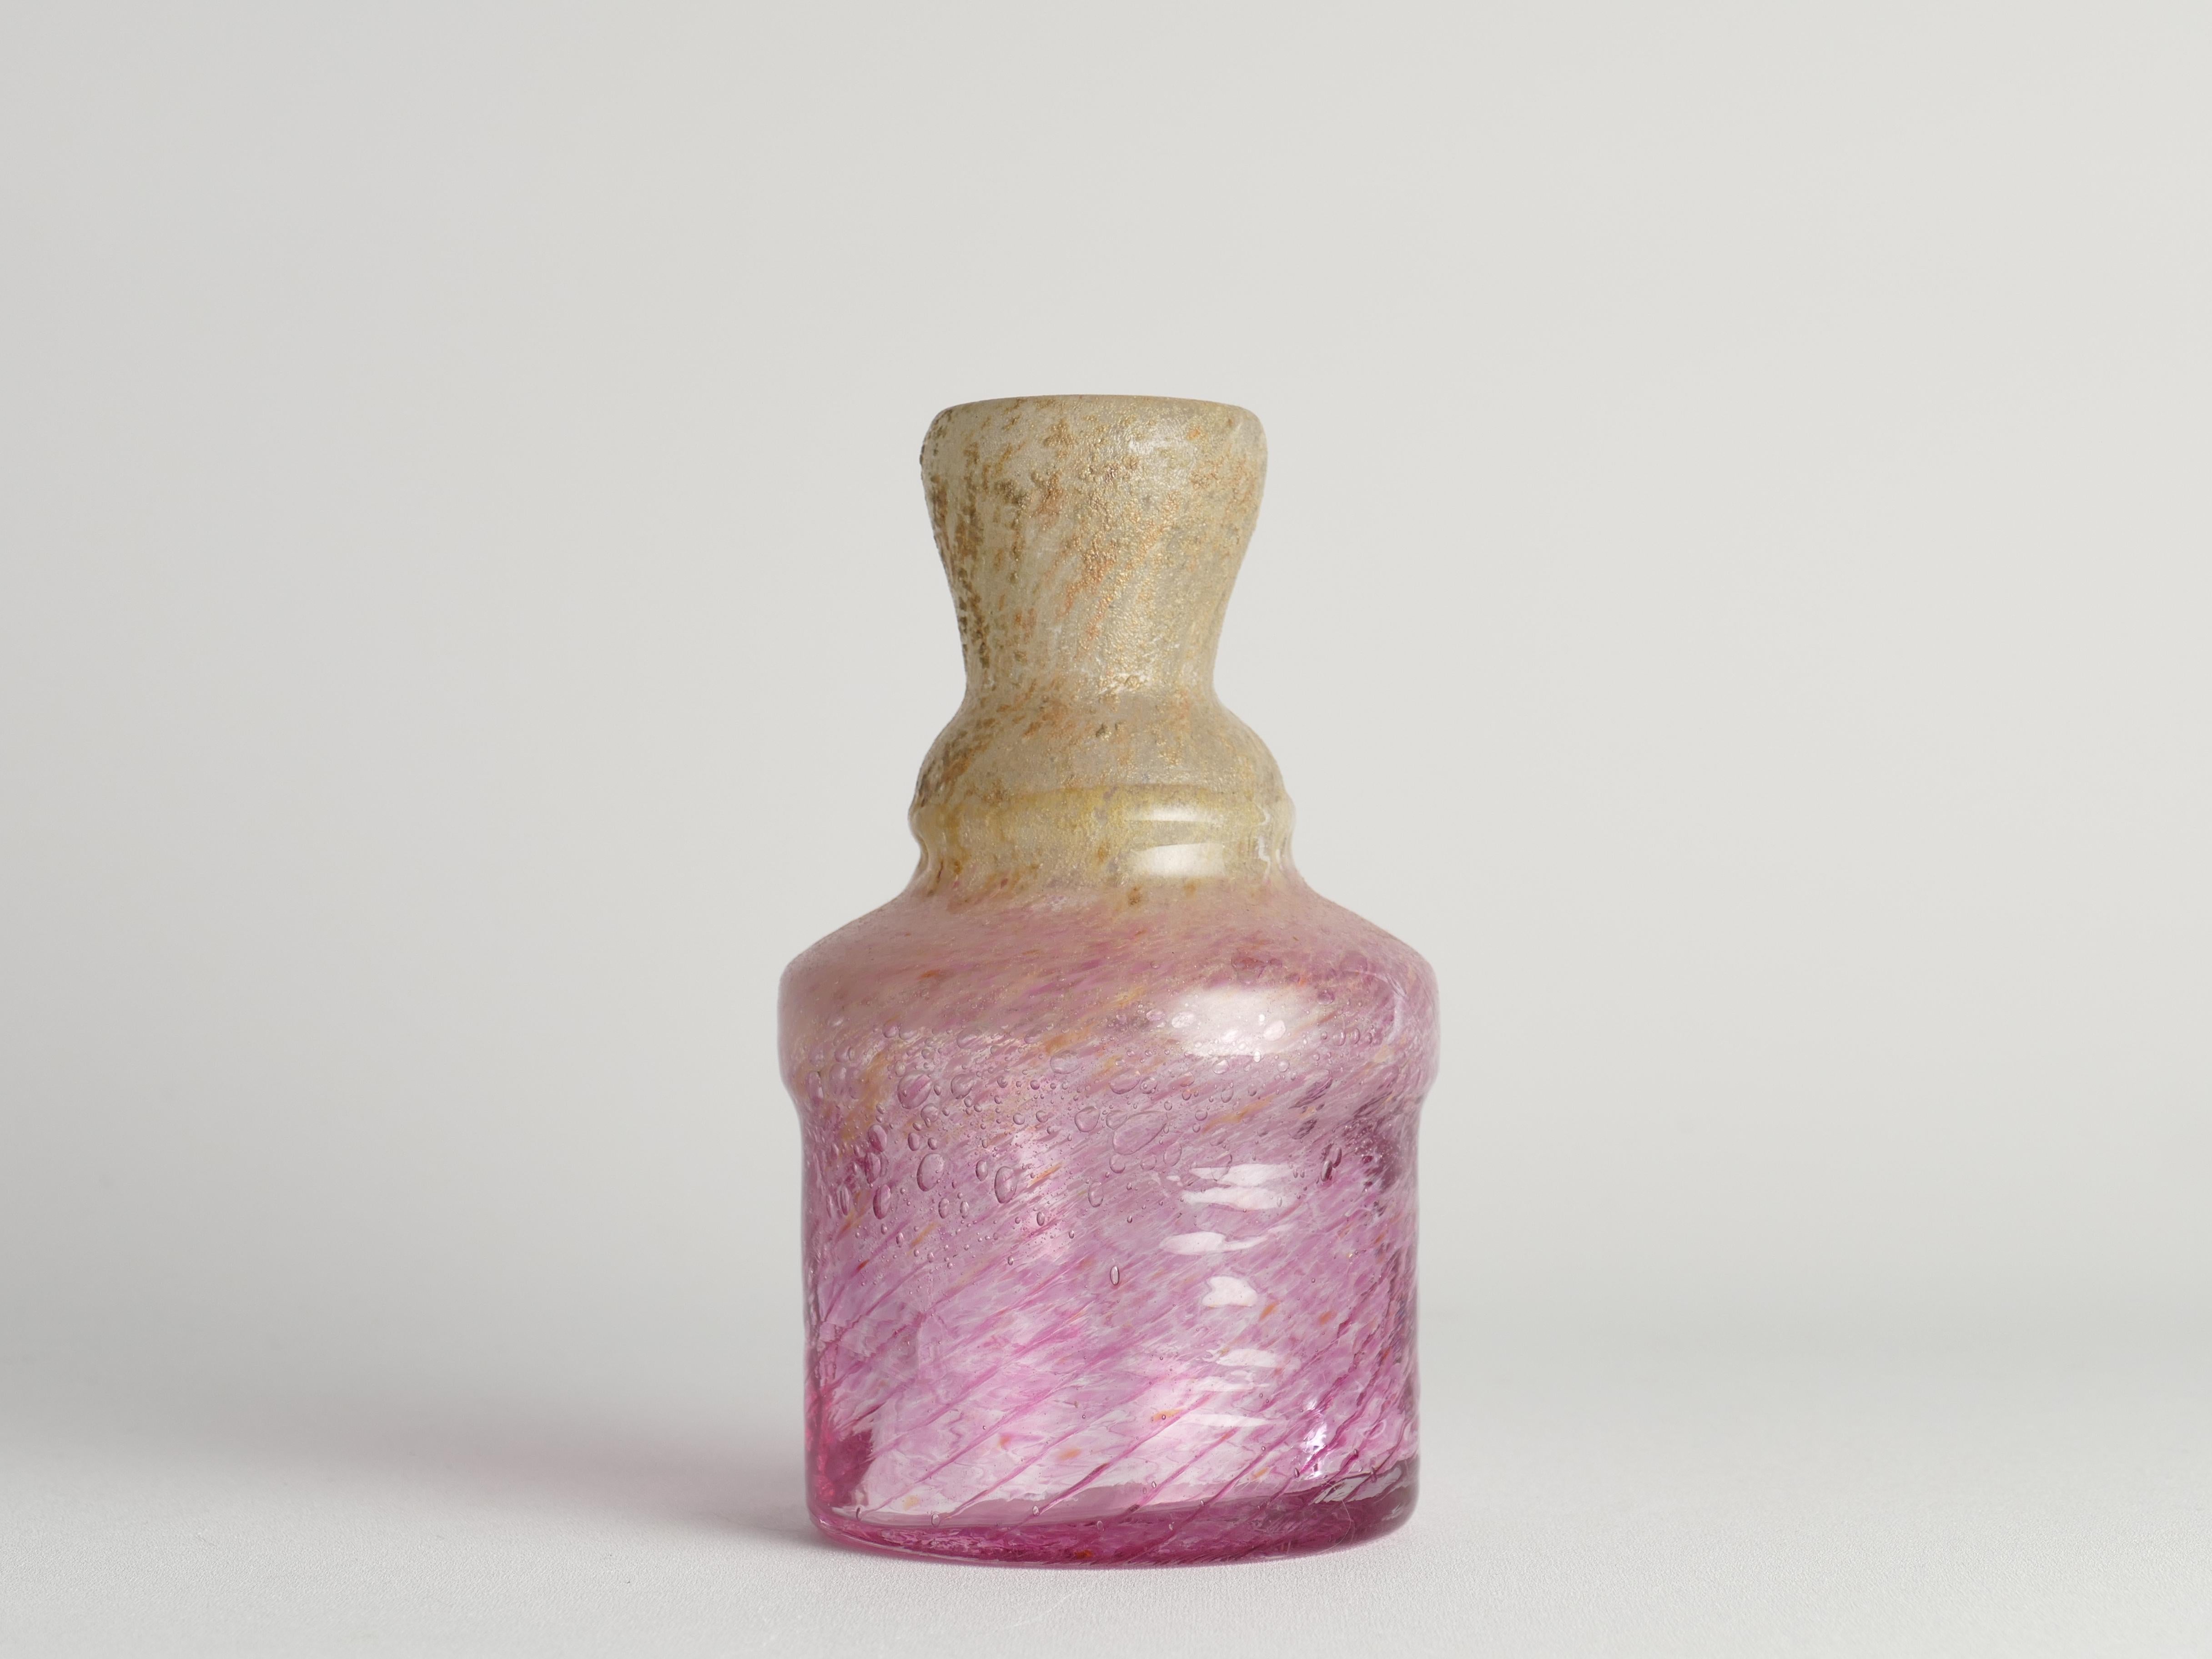 Other Unique Bubblegum Pink and Yellow Art Glass Vase by Milan Vobruba, Sweden 1980s For Sale